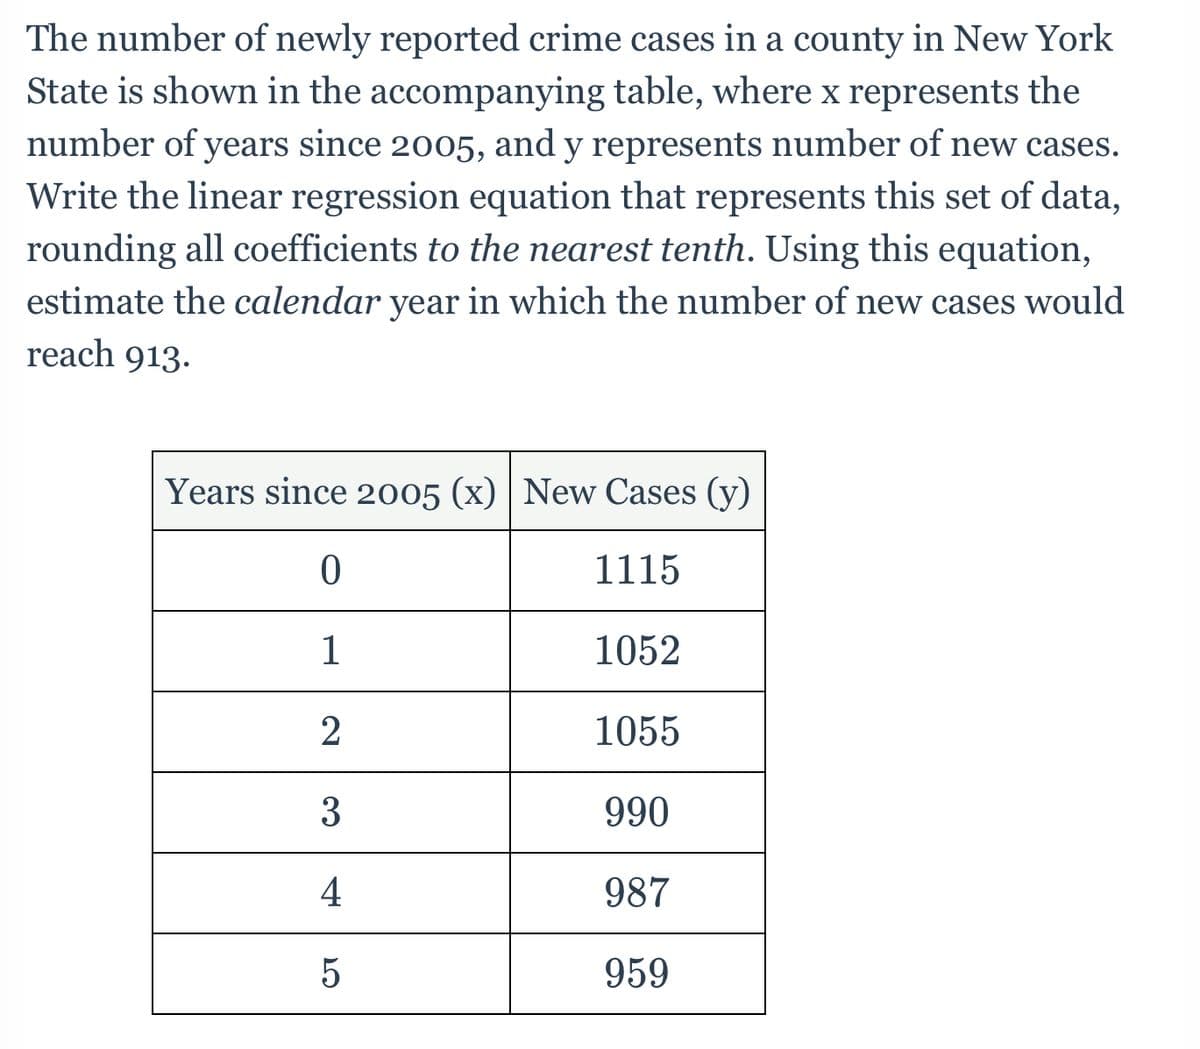 The number of newly reported crime cases in a county in New York
State is shown in the accompanying table, where x represents the
number of years since 2005, and y represents number of new cases.
Write the linear regression equation that represents this set of data,
rounding all coefficients to the nearest tenth. Using this equation,
estimate the calendar year in which the number of new cases would
reach 913.
Years since 2005 (x) | New Cases (y)
1115
1
1052
2
1055
3
990
987
959
